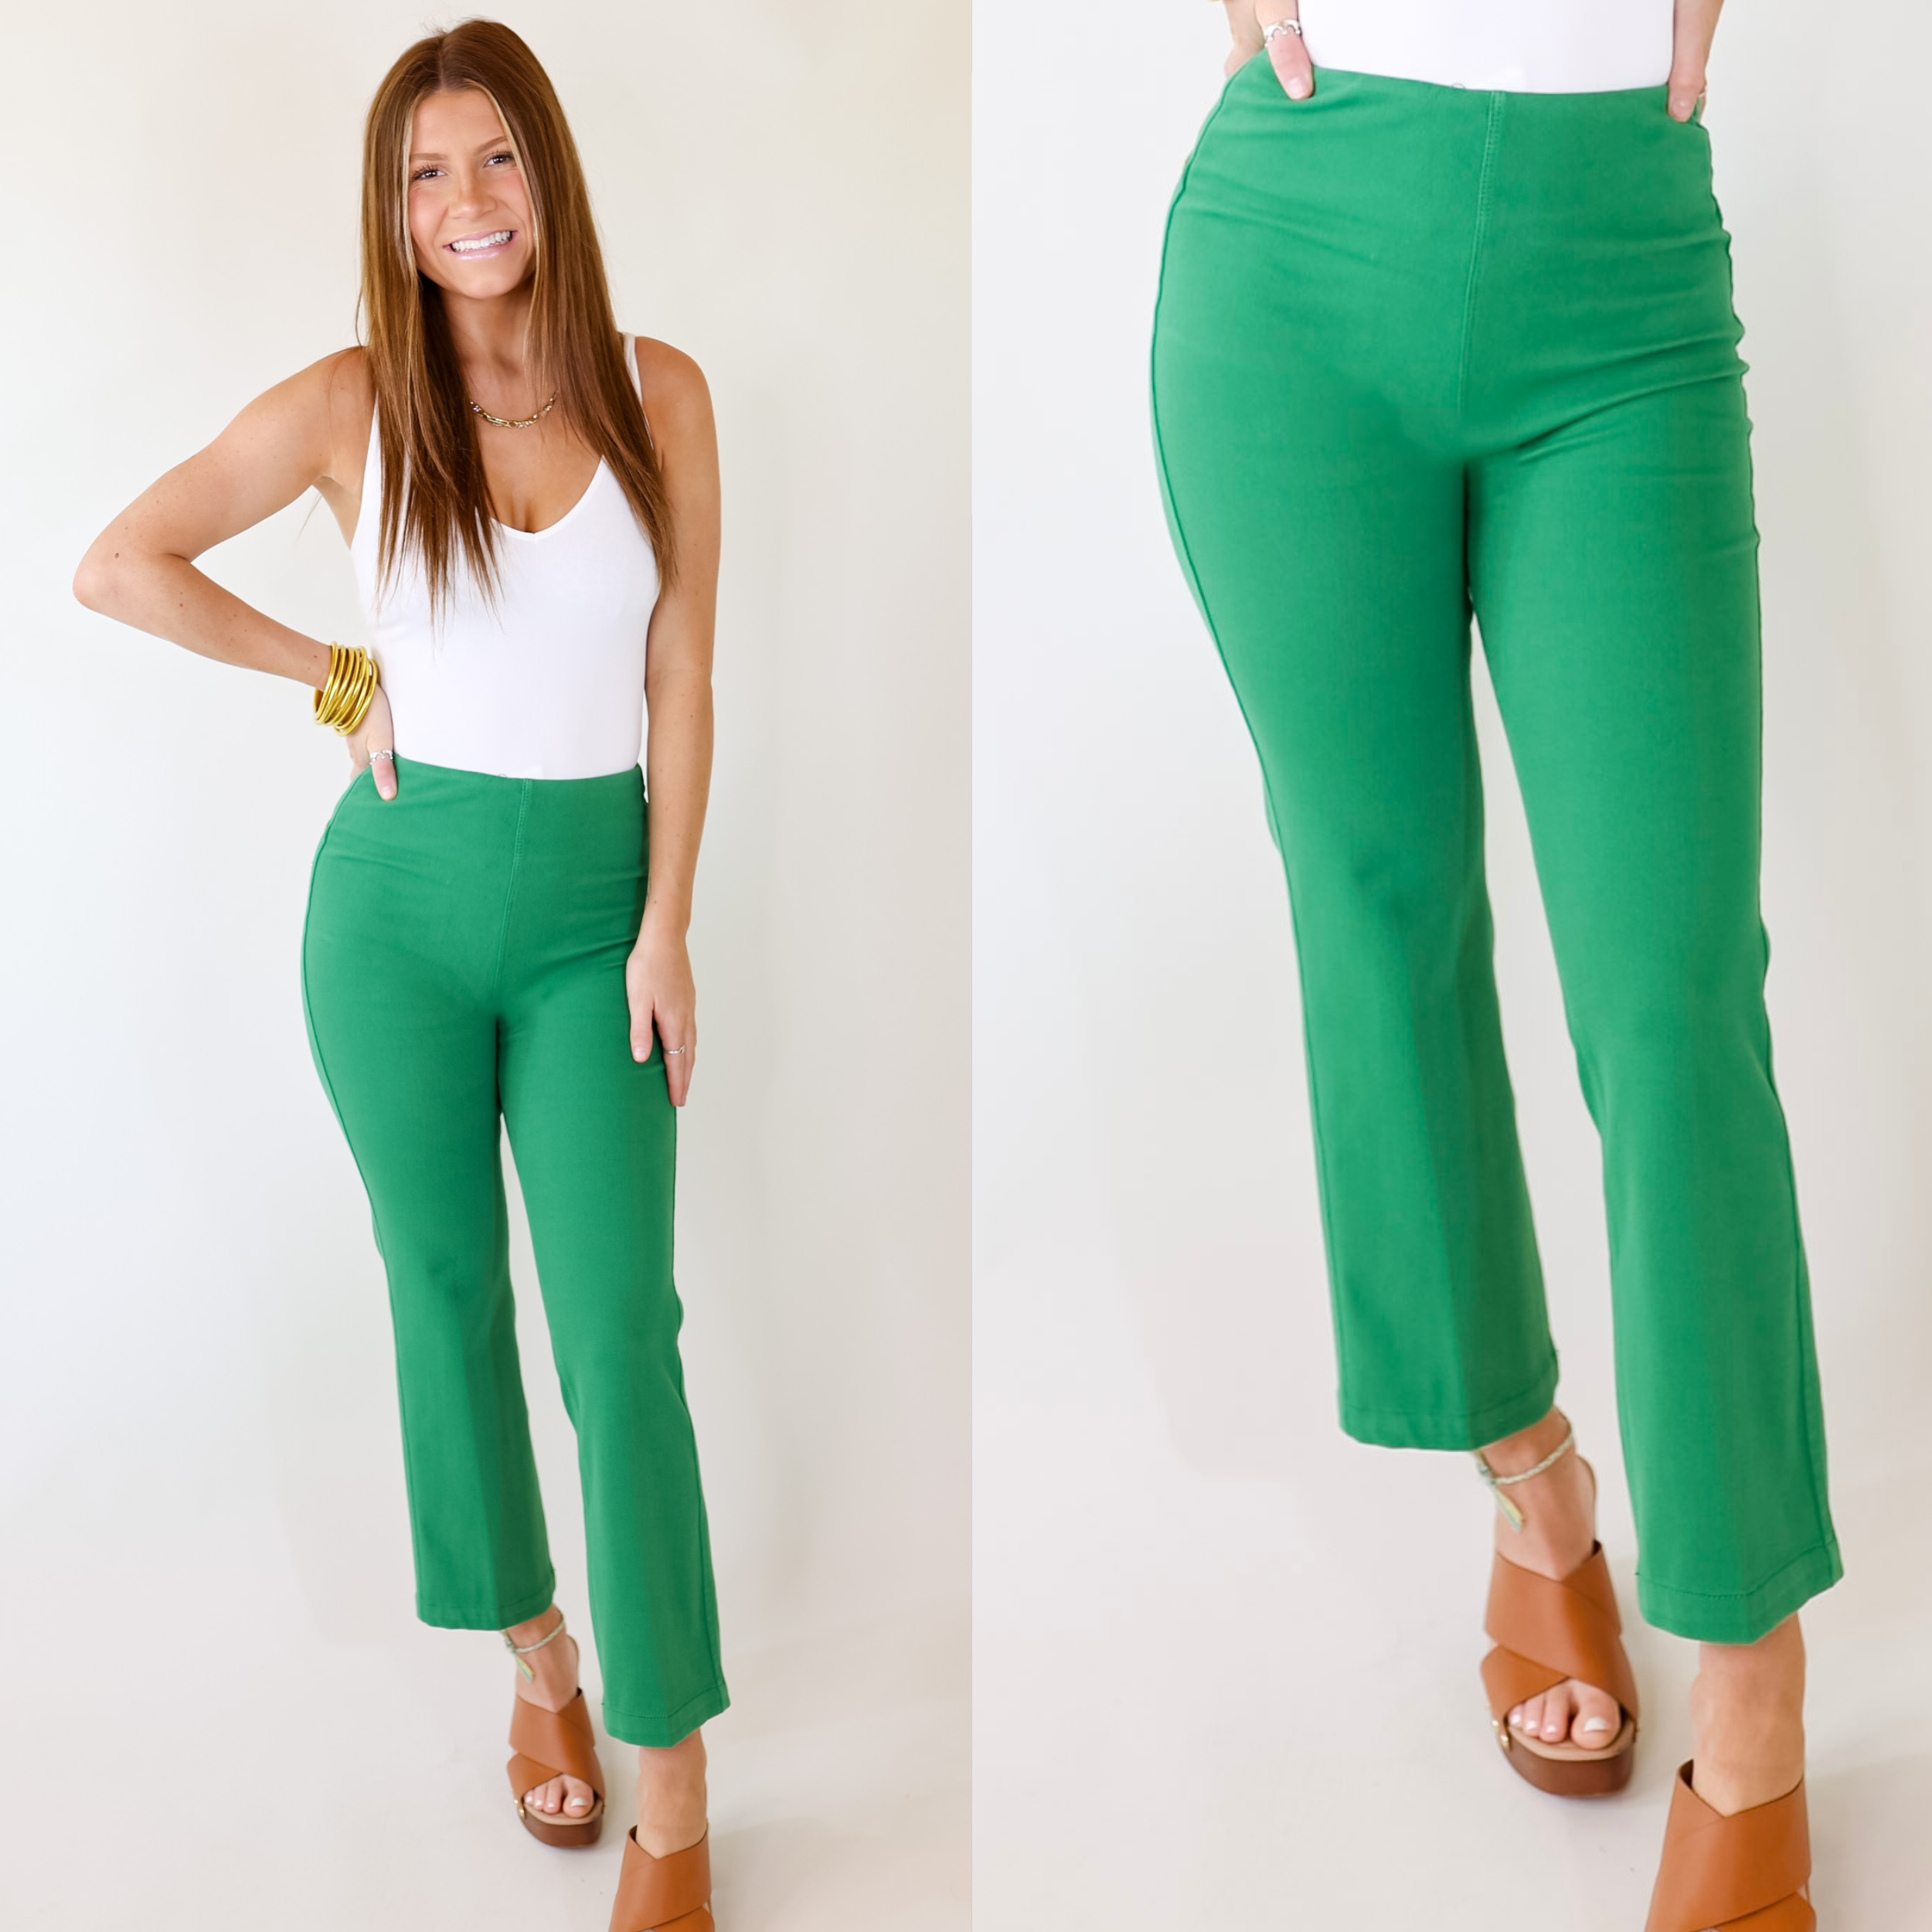 Lyssé | Denim Baby Bootcut Ankle Pants in Lily Pad Green - Giddy Up Glamour Boutique